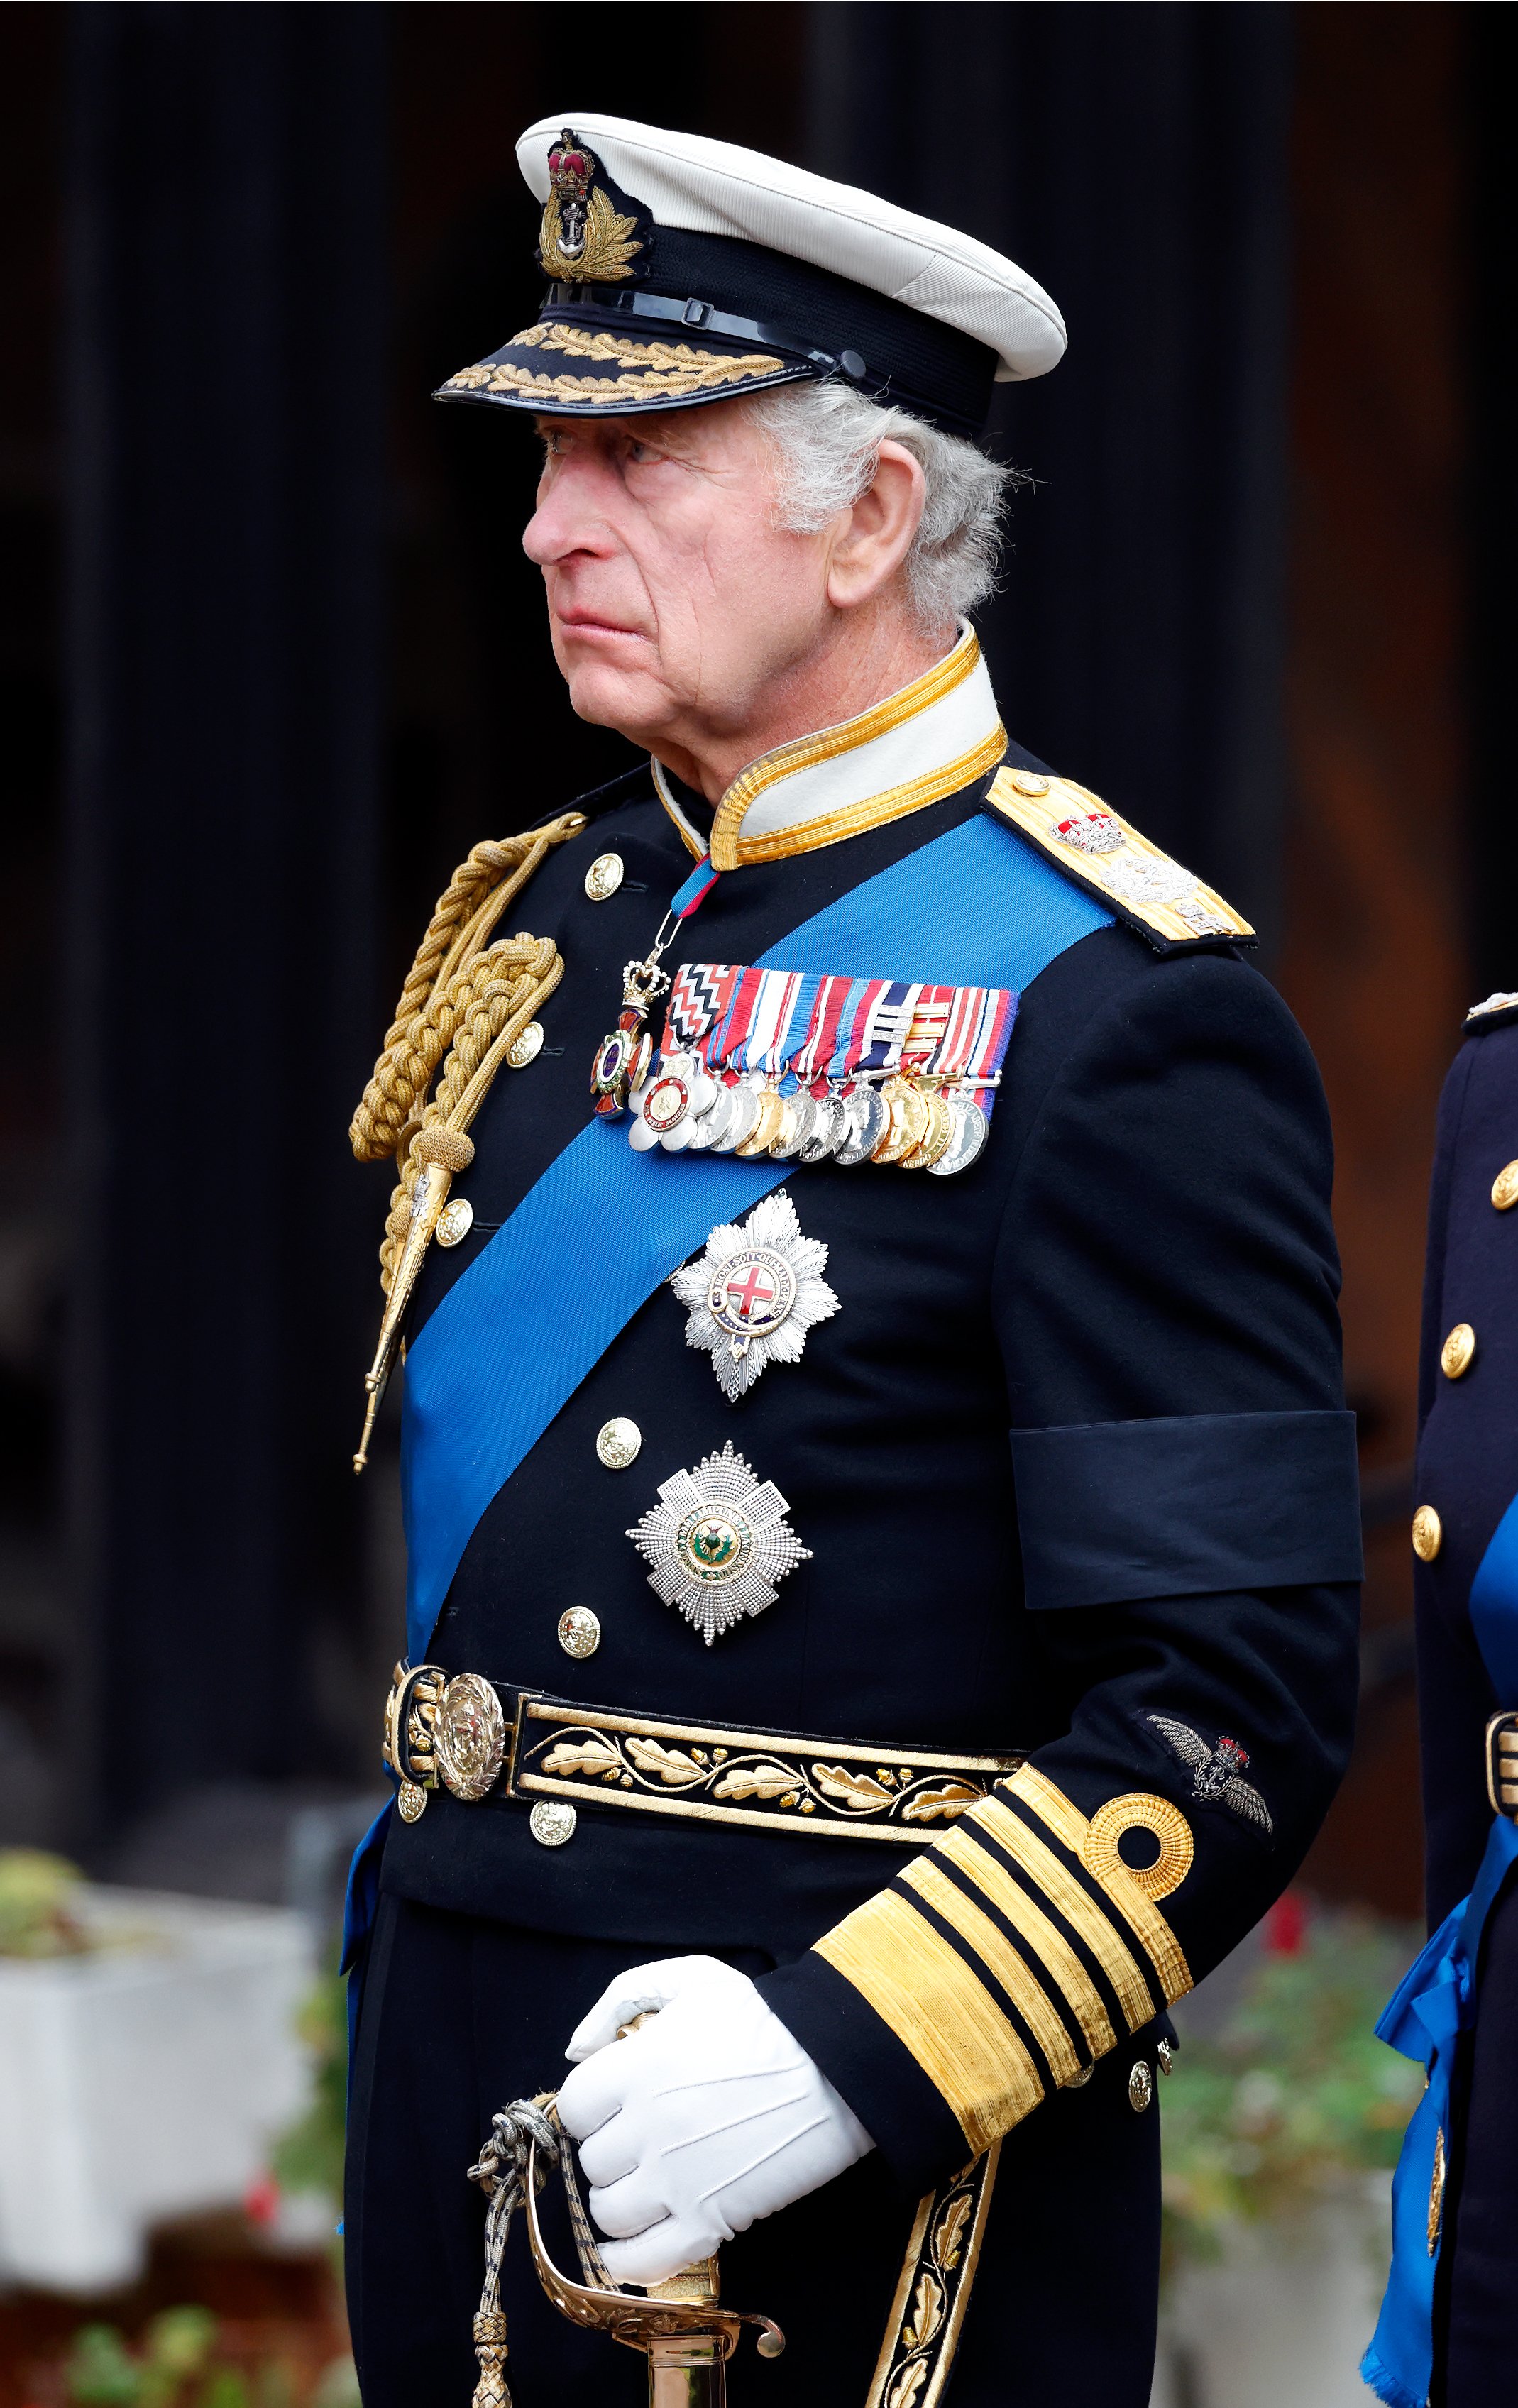 King Charles III attends the Committal Service for Queen Elizabeth II at St George's Chapel, Windsor Castle on September 19, 2022 in Windsor, England | Source: Getty Images